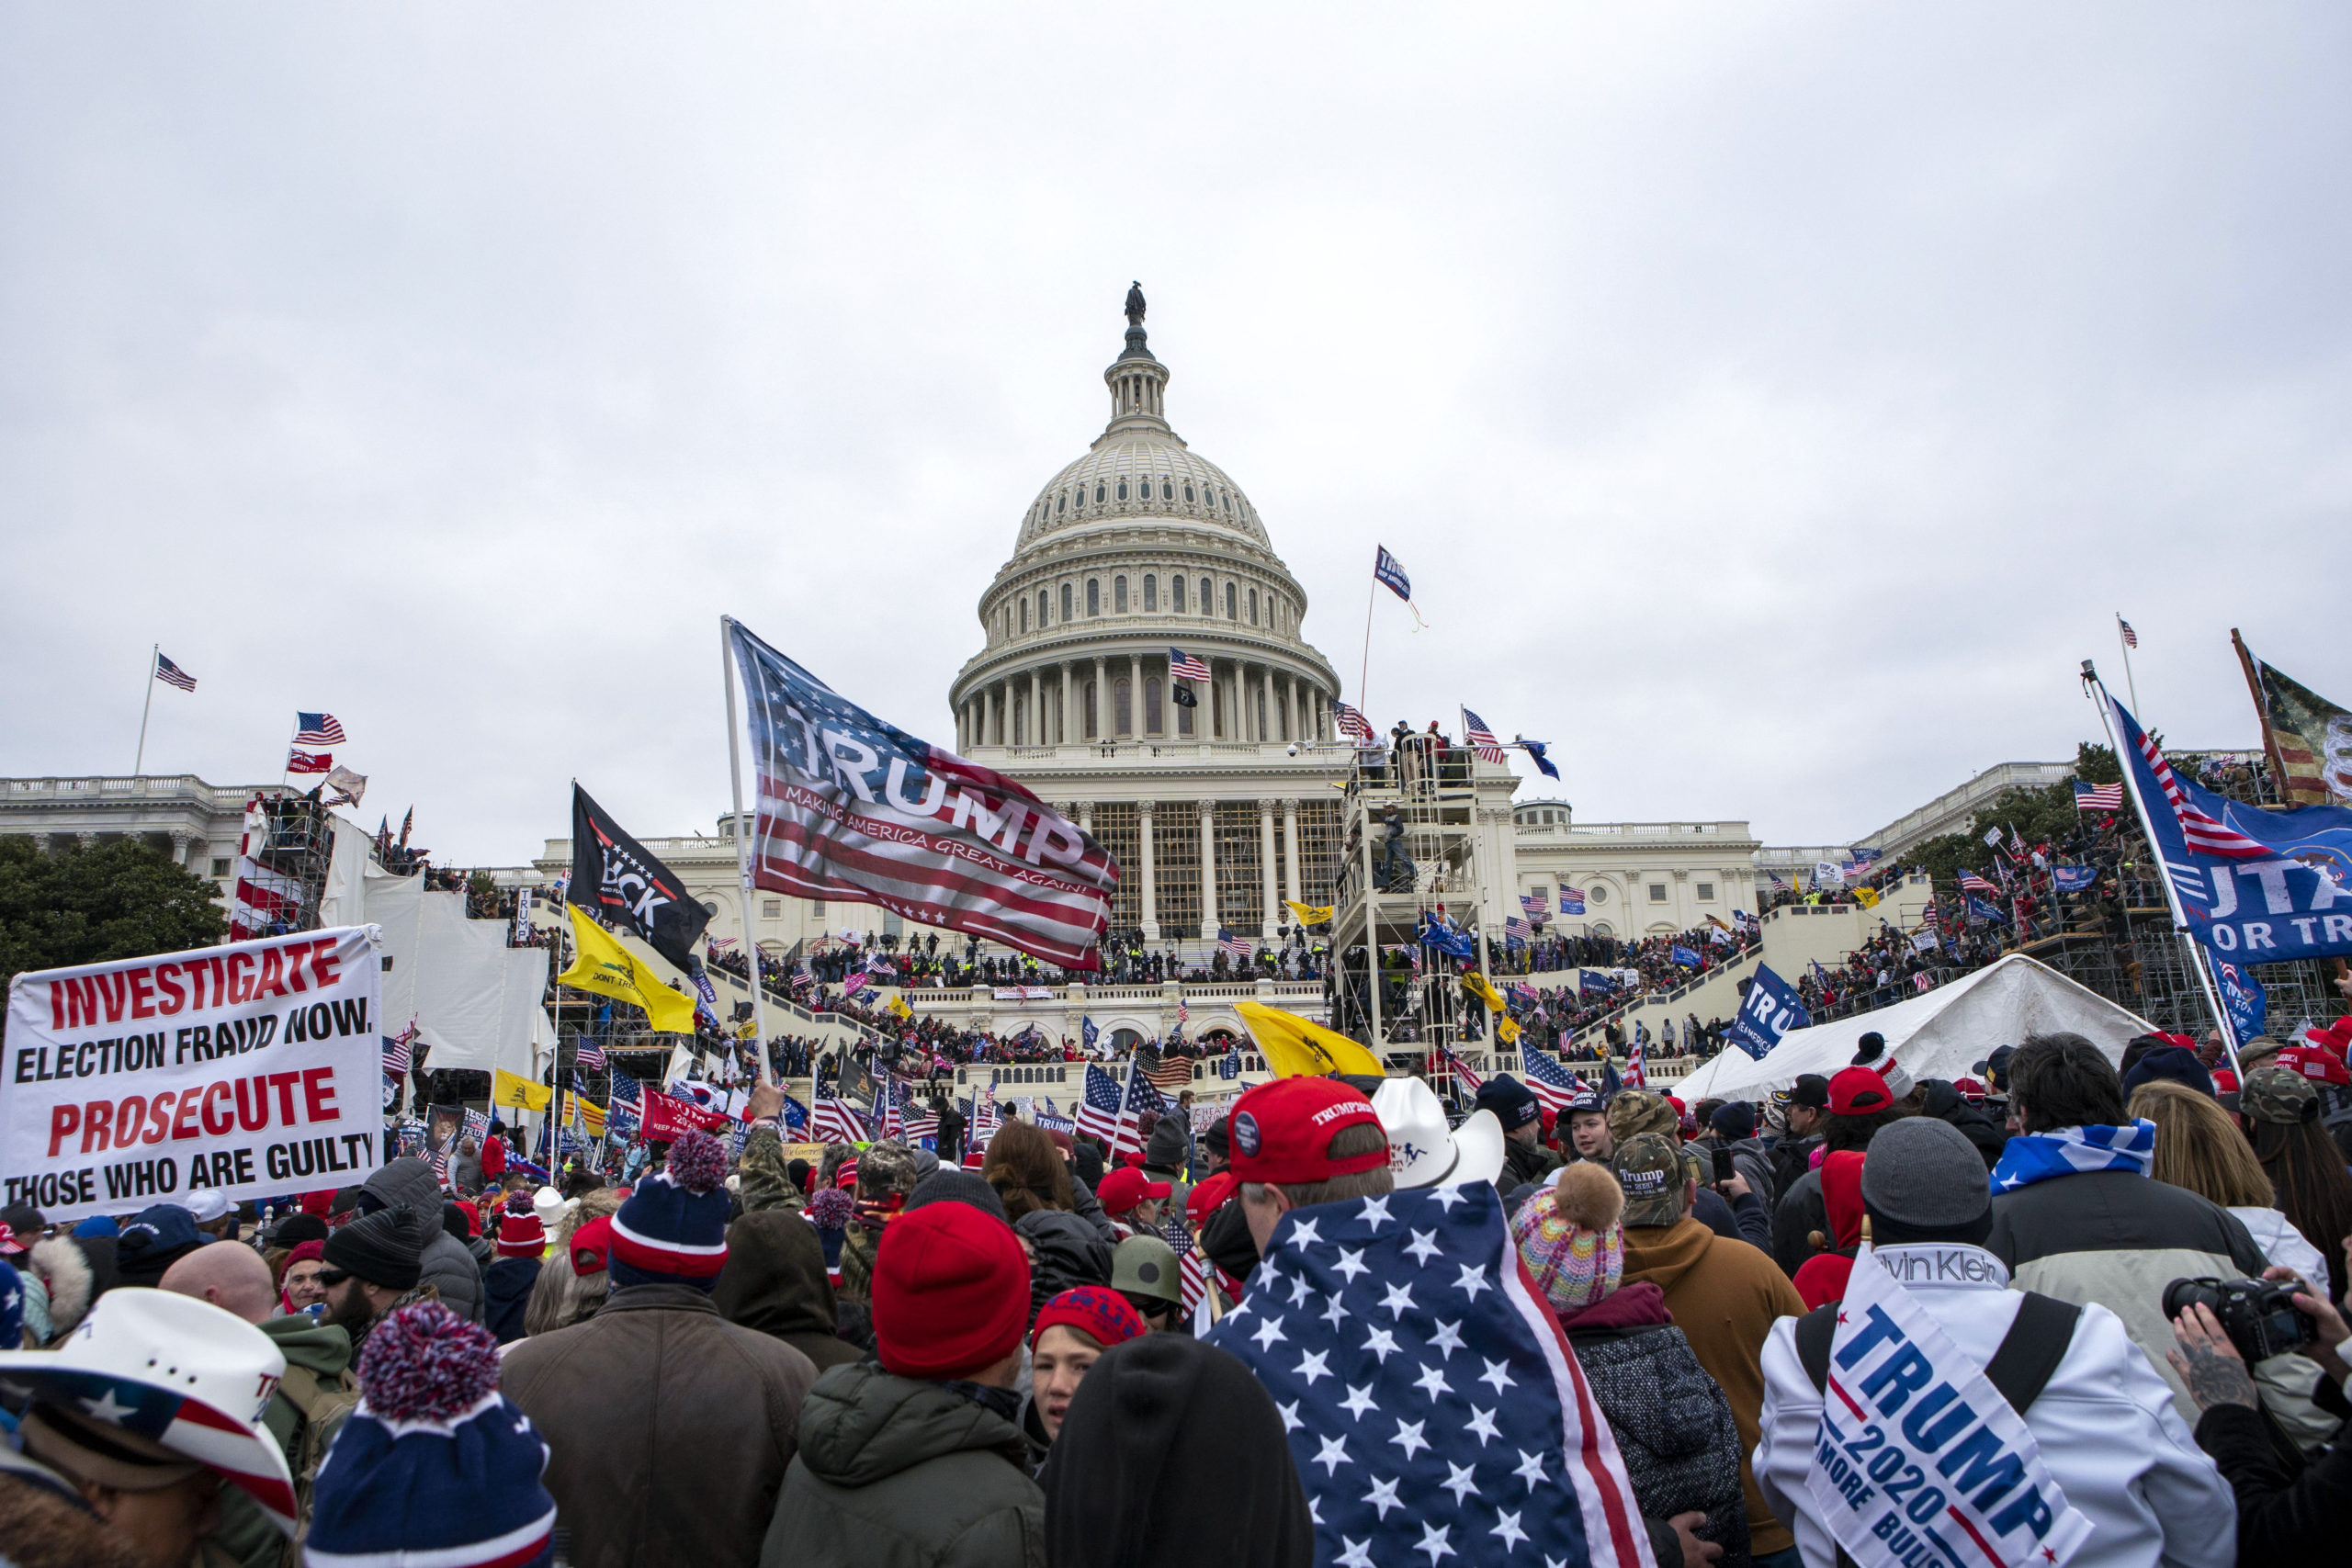 Trump supporters rally at the US Capitol in Washington in this file photo from Jan. 6, 2021. A federal judge acquitted Matthew Martin of charges that he illegally entered the premises after he watched a video that showed police waving the man into the building.